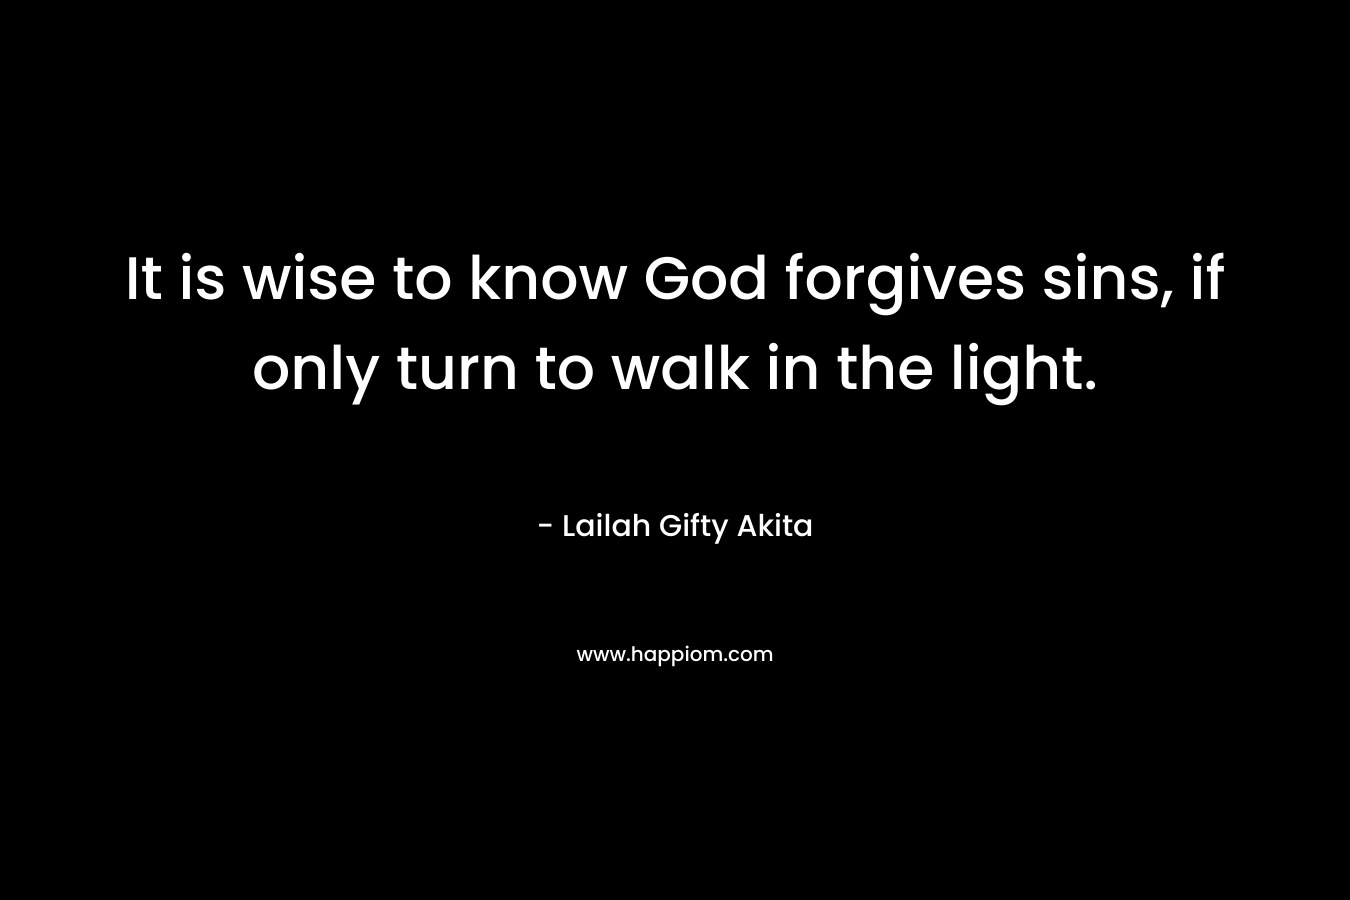 It is wise to know God forgives sins, if only turn to walk in the light.